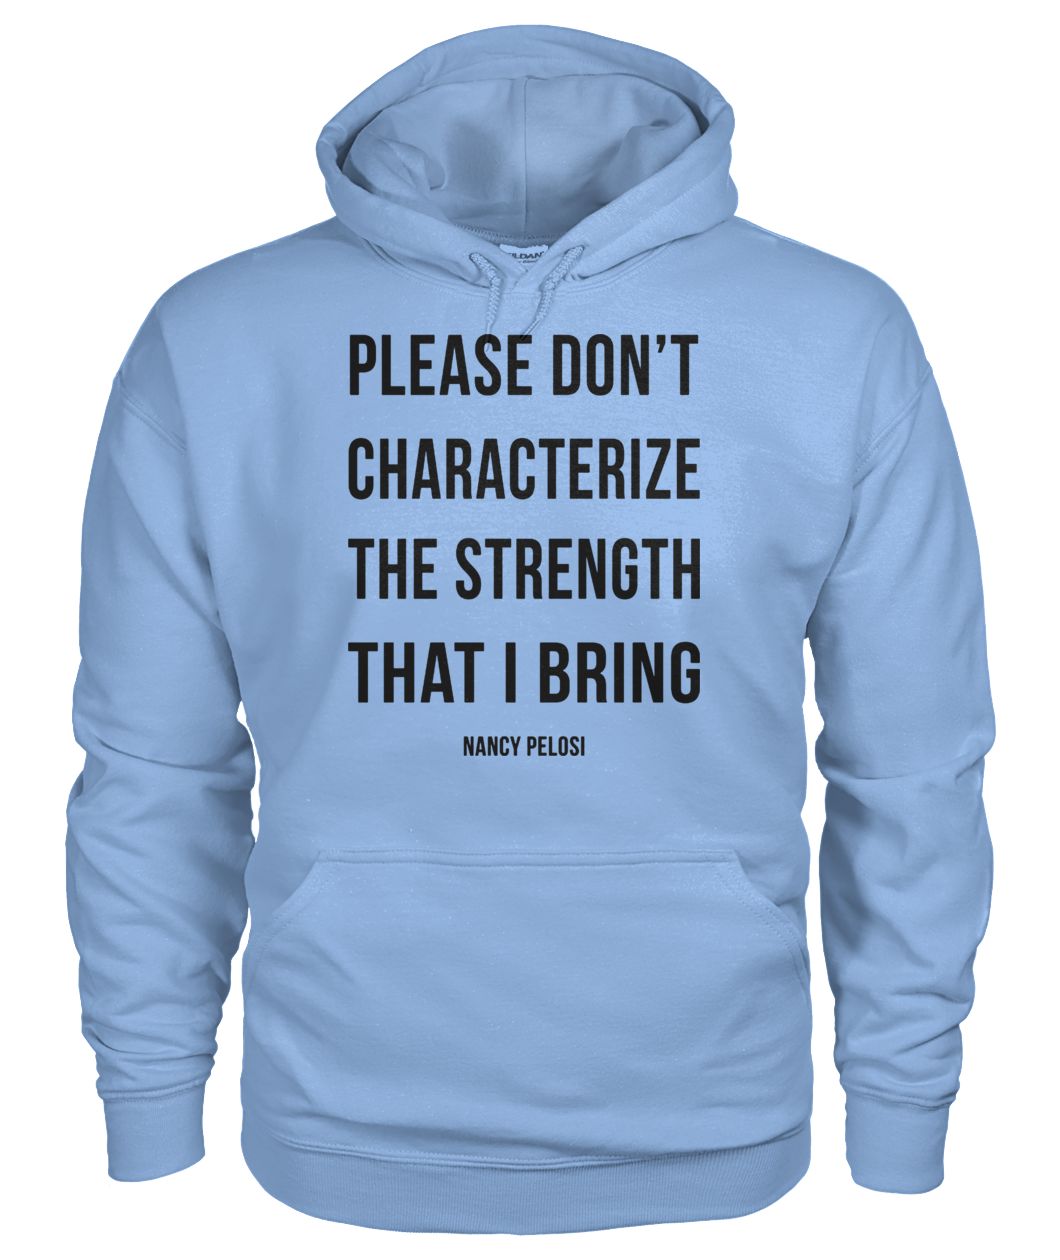 Please don't characterize the strength that I bring gildan hoodie